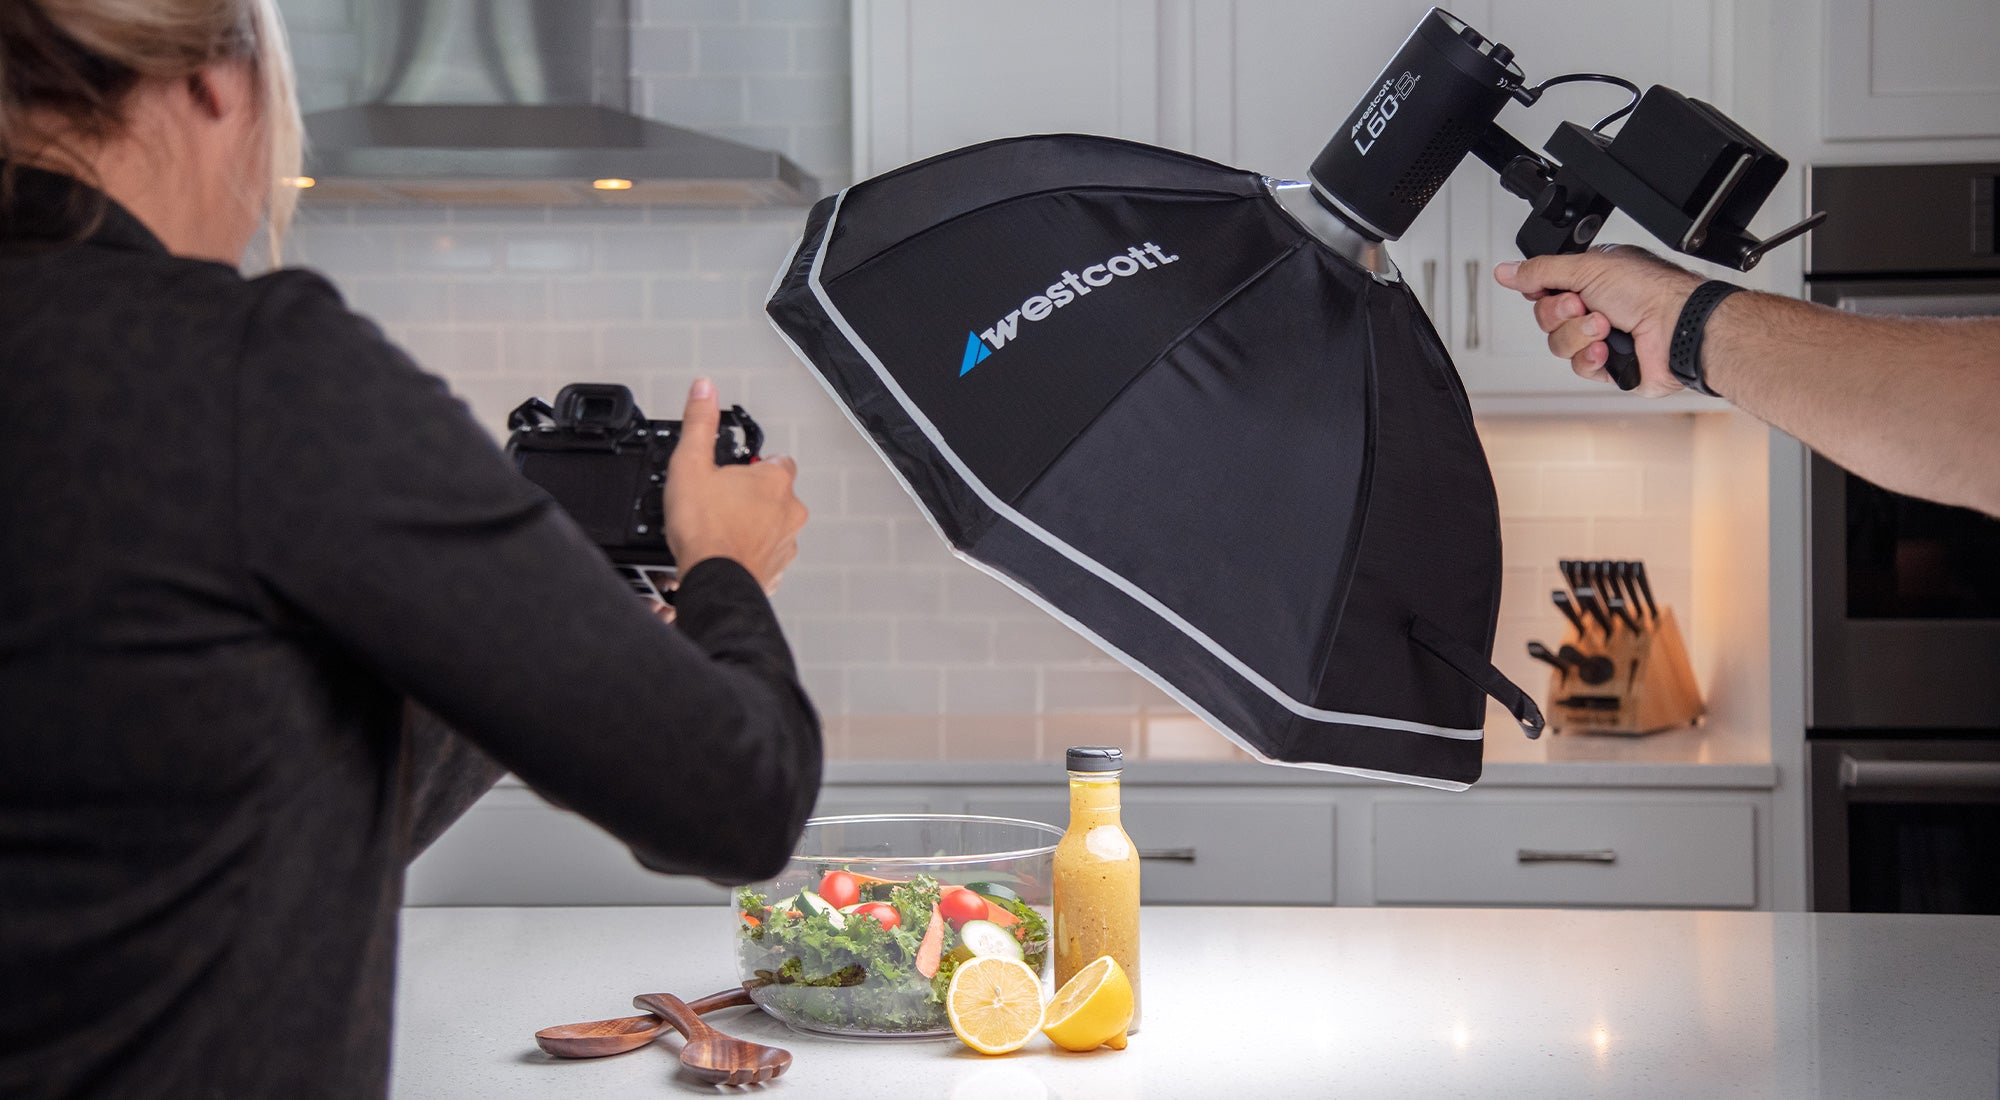 L60-B LED COB with Portable Battery Grip Used in Kitchen for Food Photography